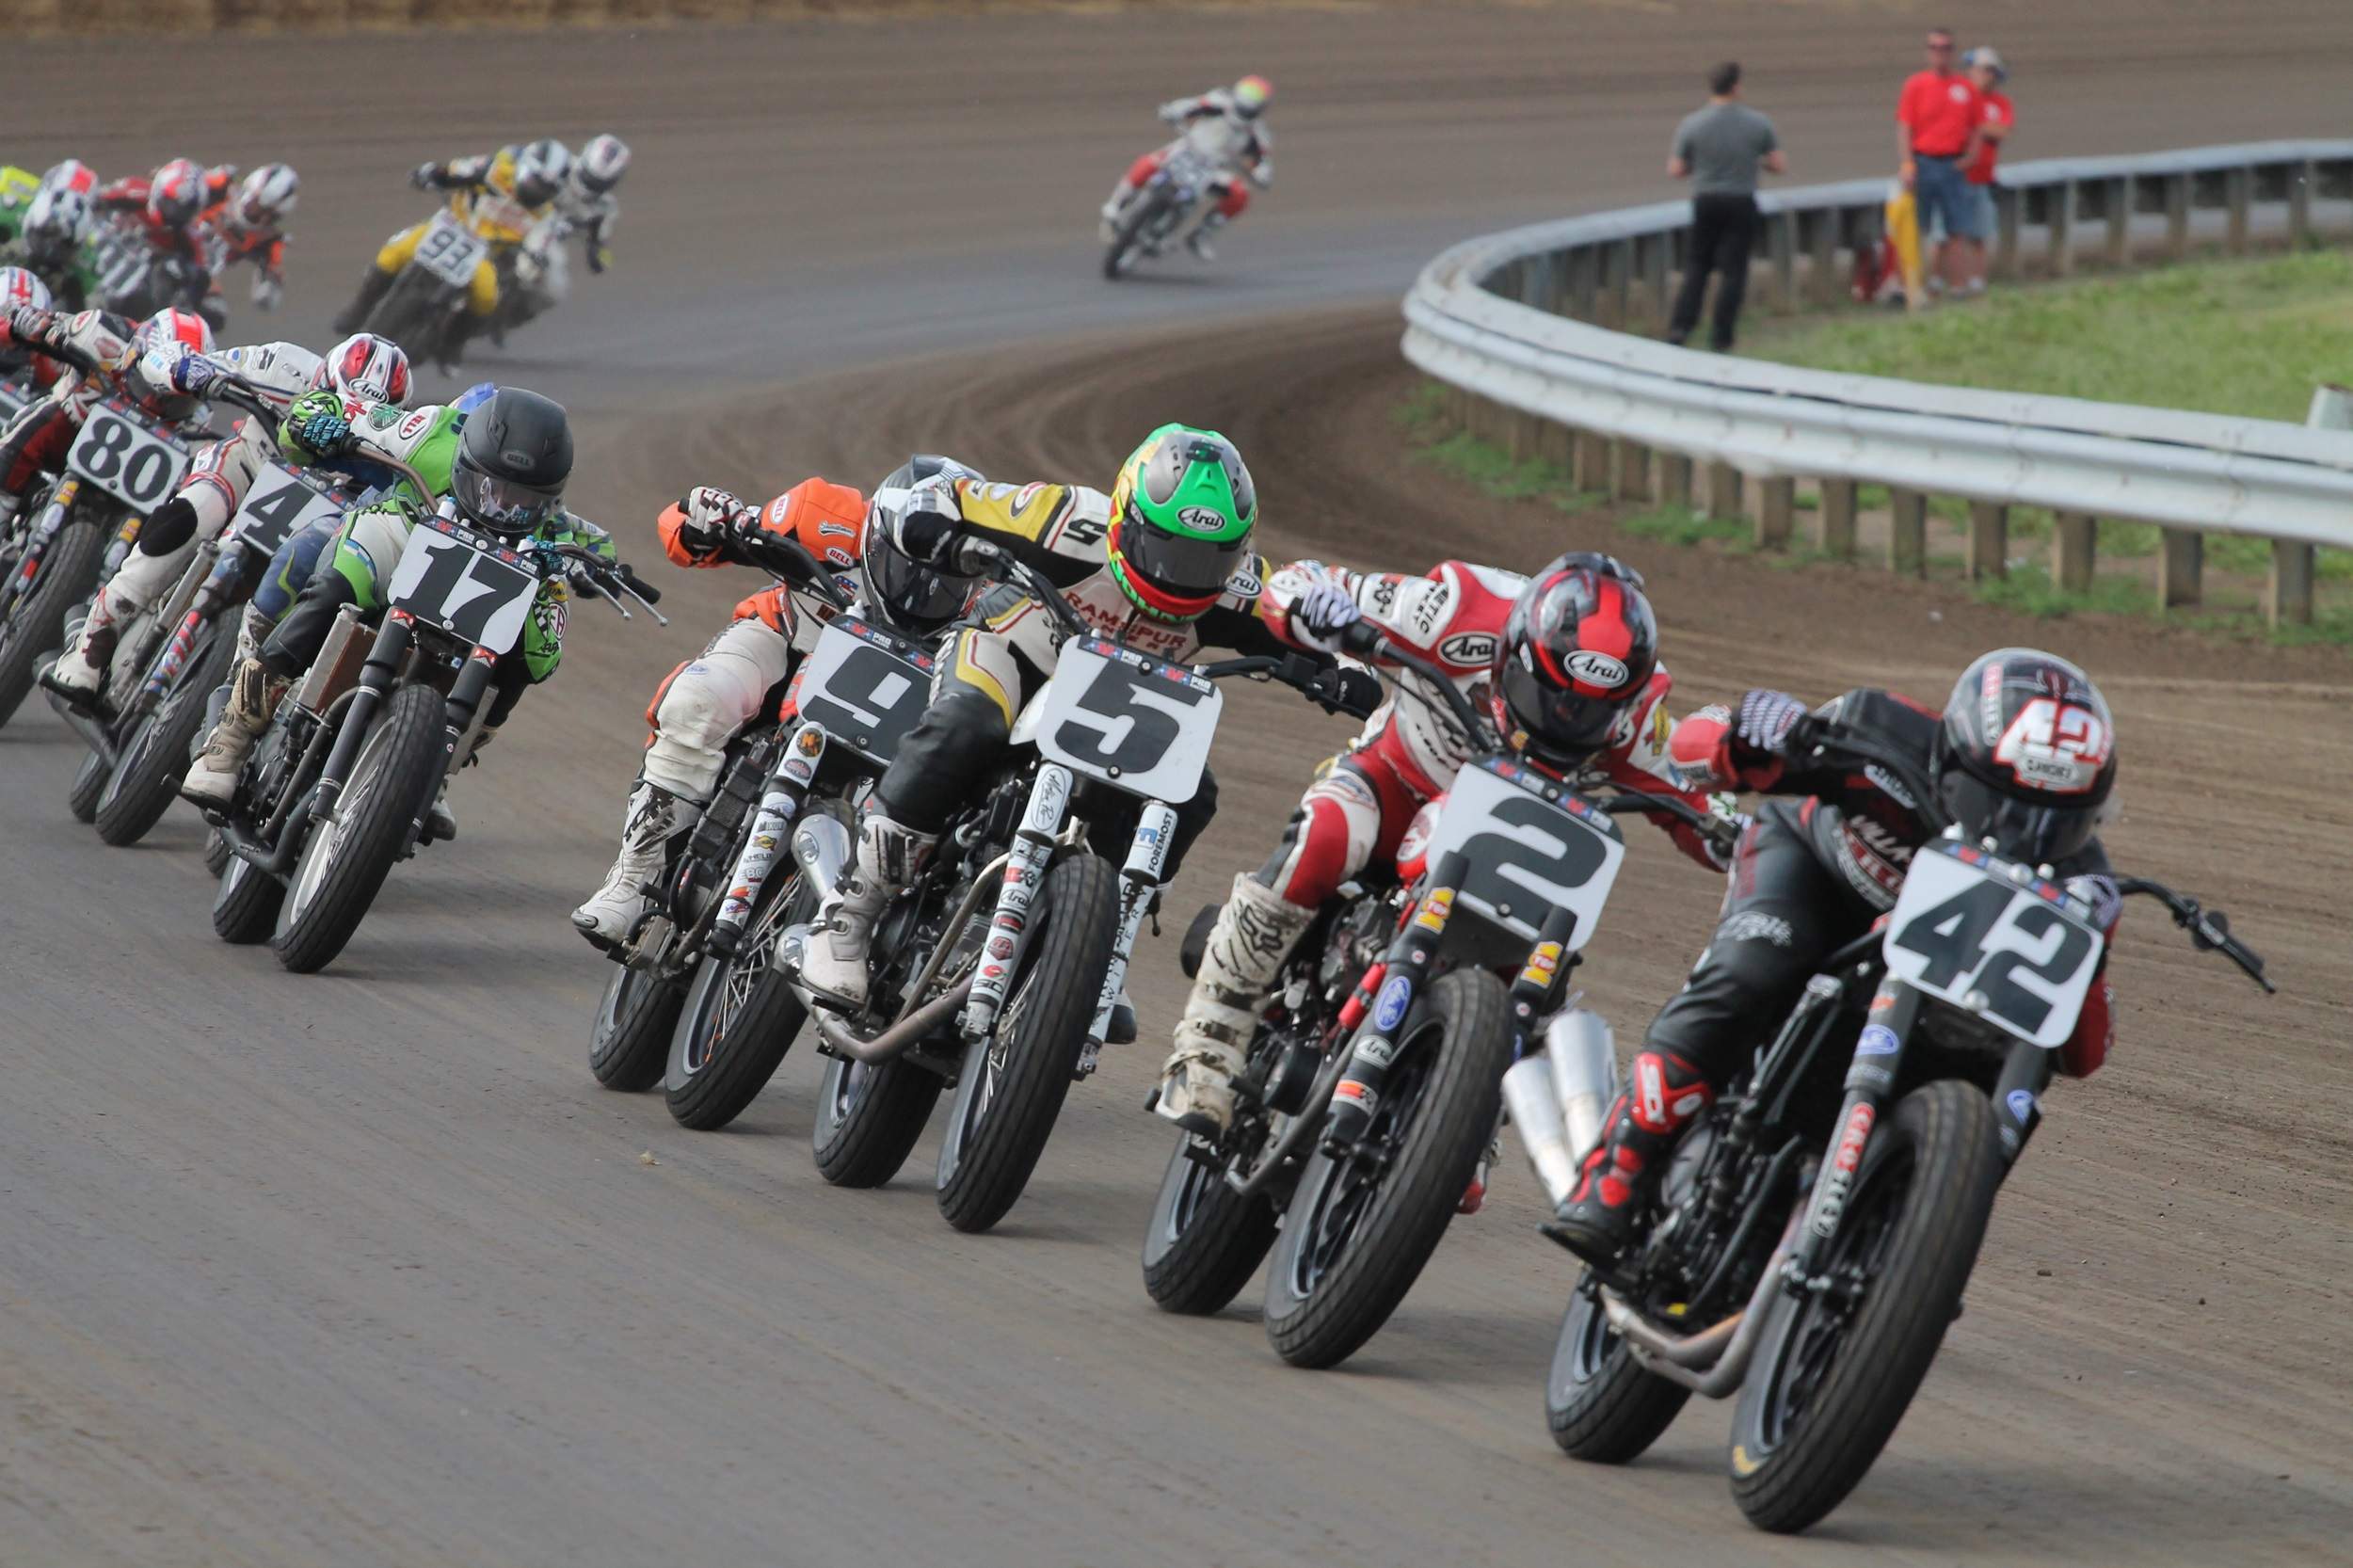 A line of motorcycles racing on the track at the Harley Davidson Springfield Mile